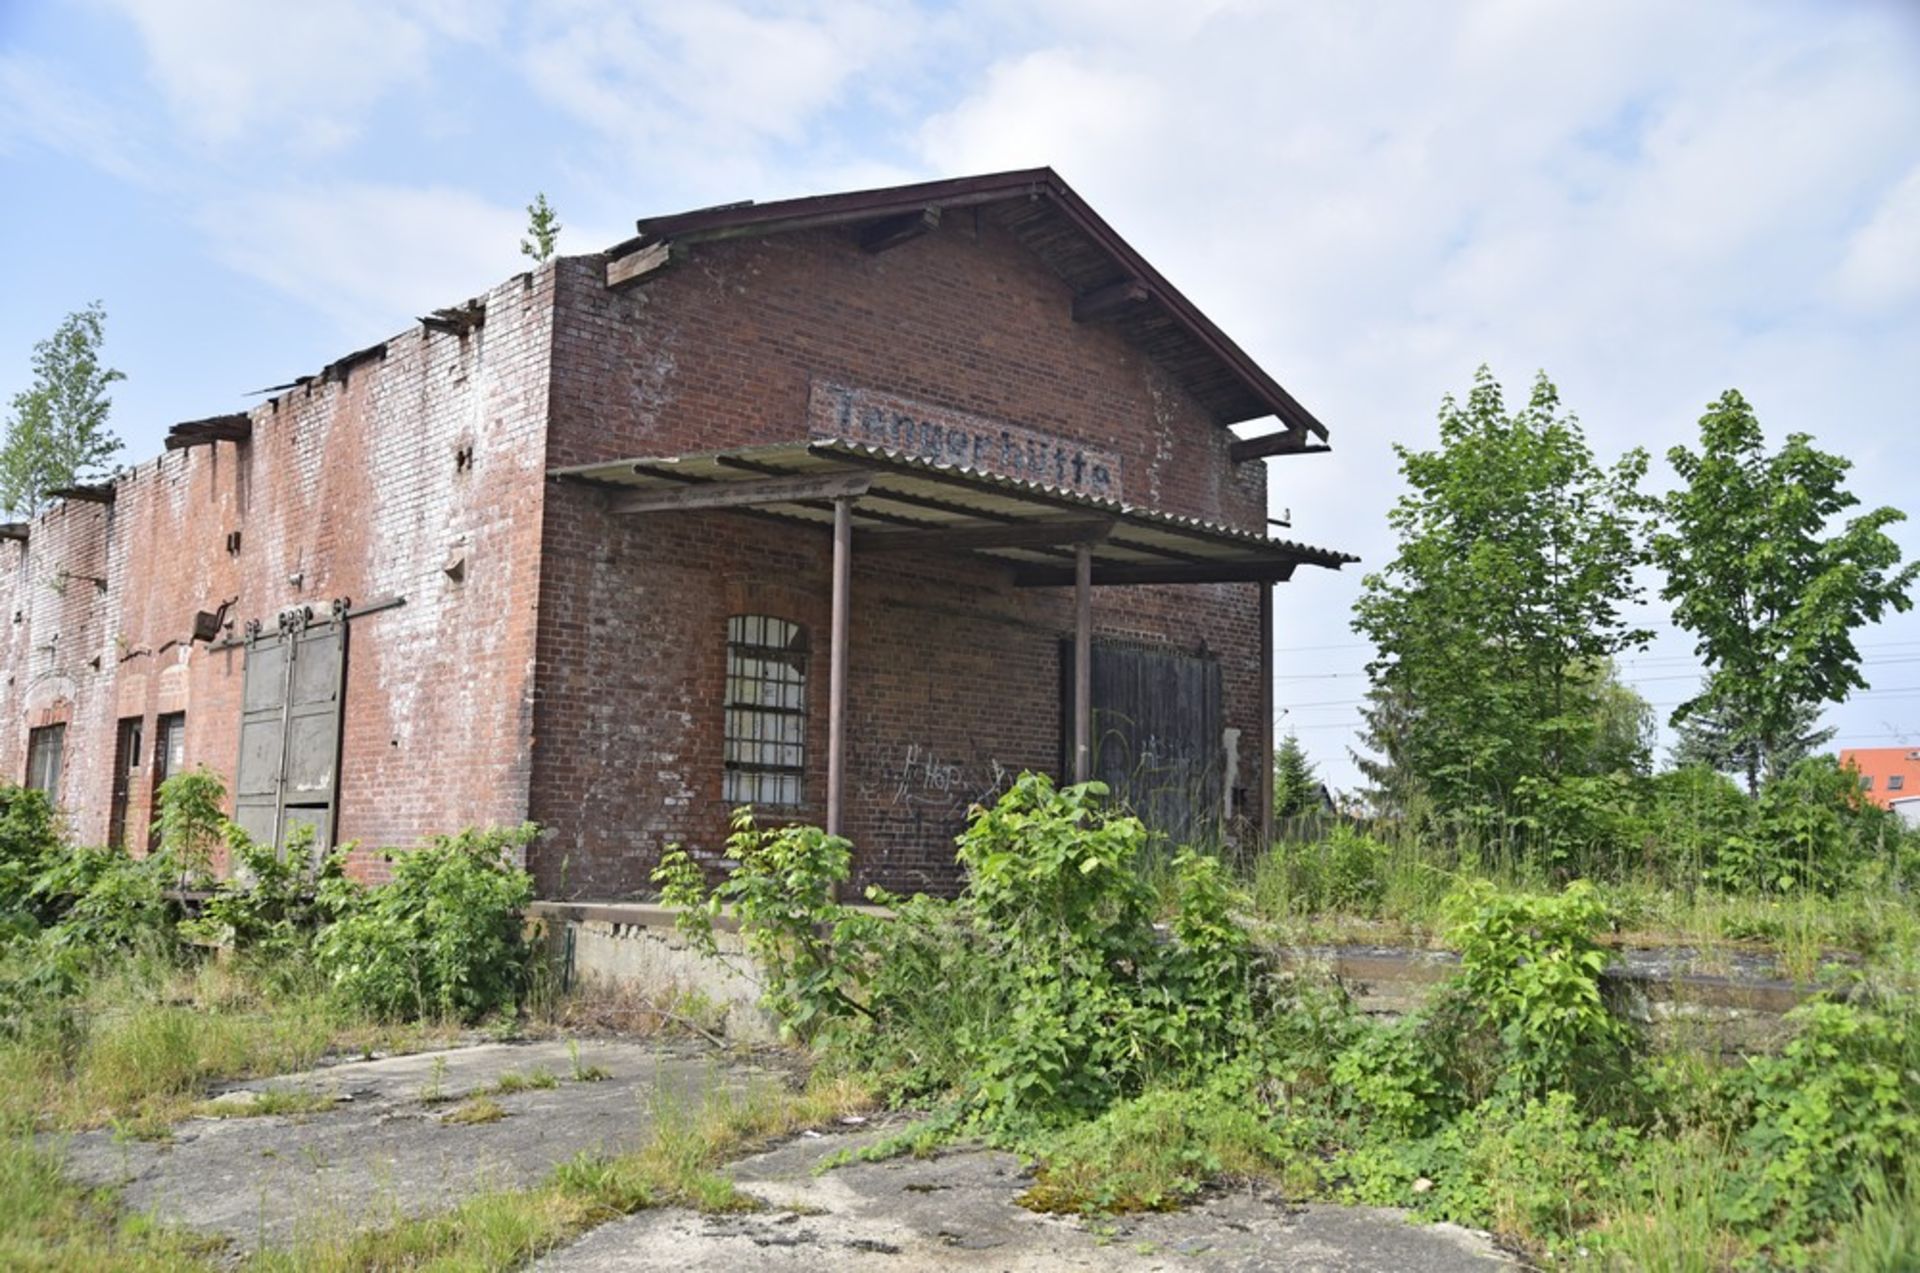 STATION HOUSE, GOODS SHED, OVER ONE ACRE Tangerhütte, Saxony, Germany, - Image 39 of 98